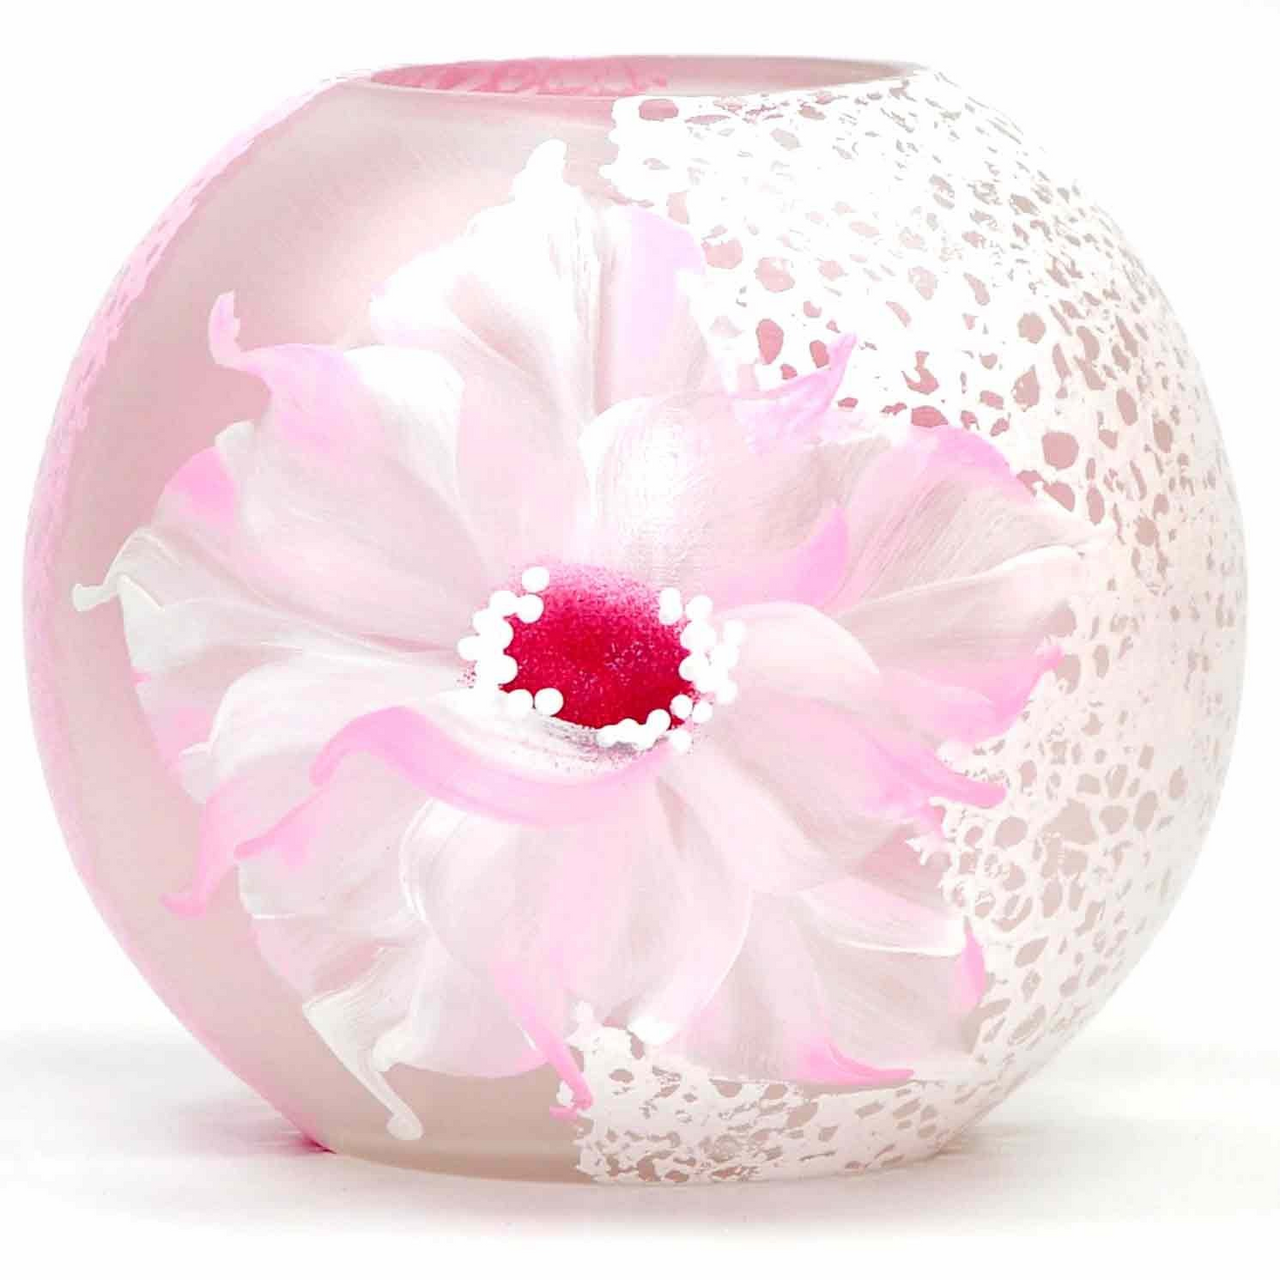 Handpainted Glass Vase for Flowers | Painted Art Glass Round Bubble Vase | Interior Design Home Room Rose Decor | Table vase 6 in